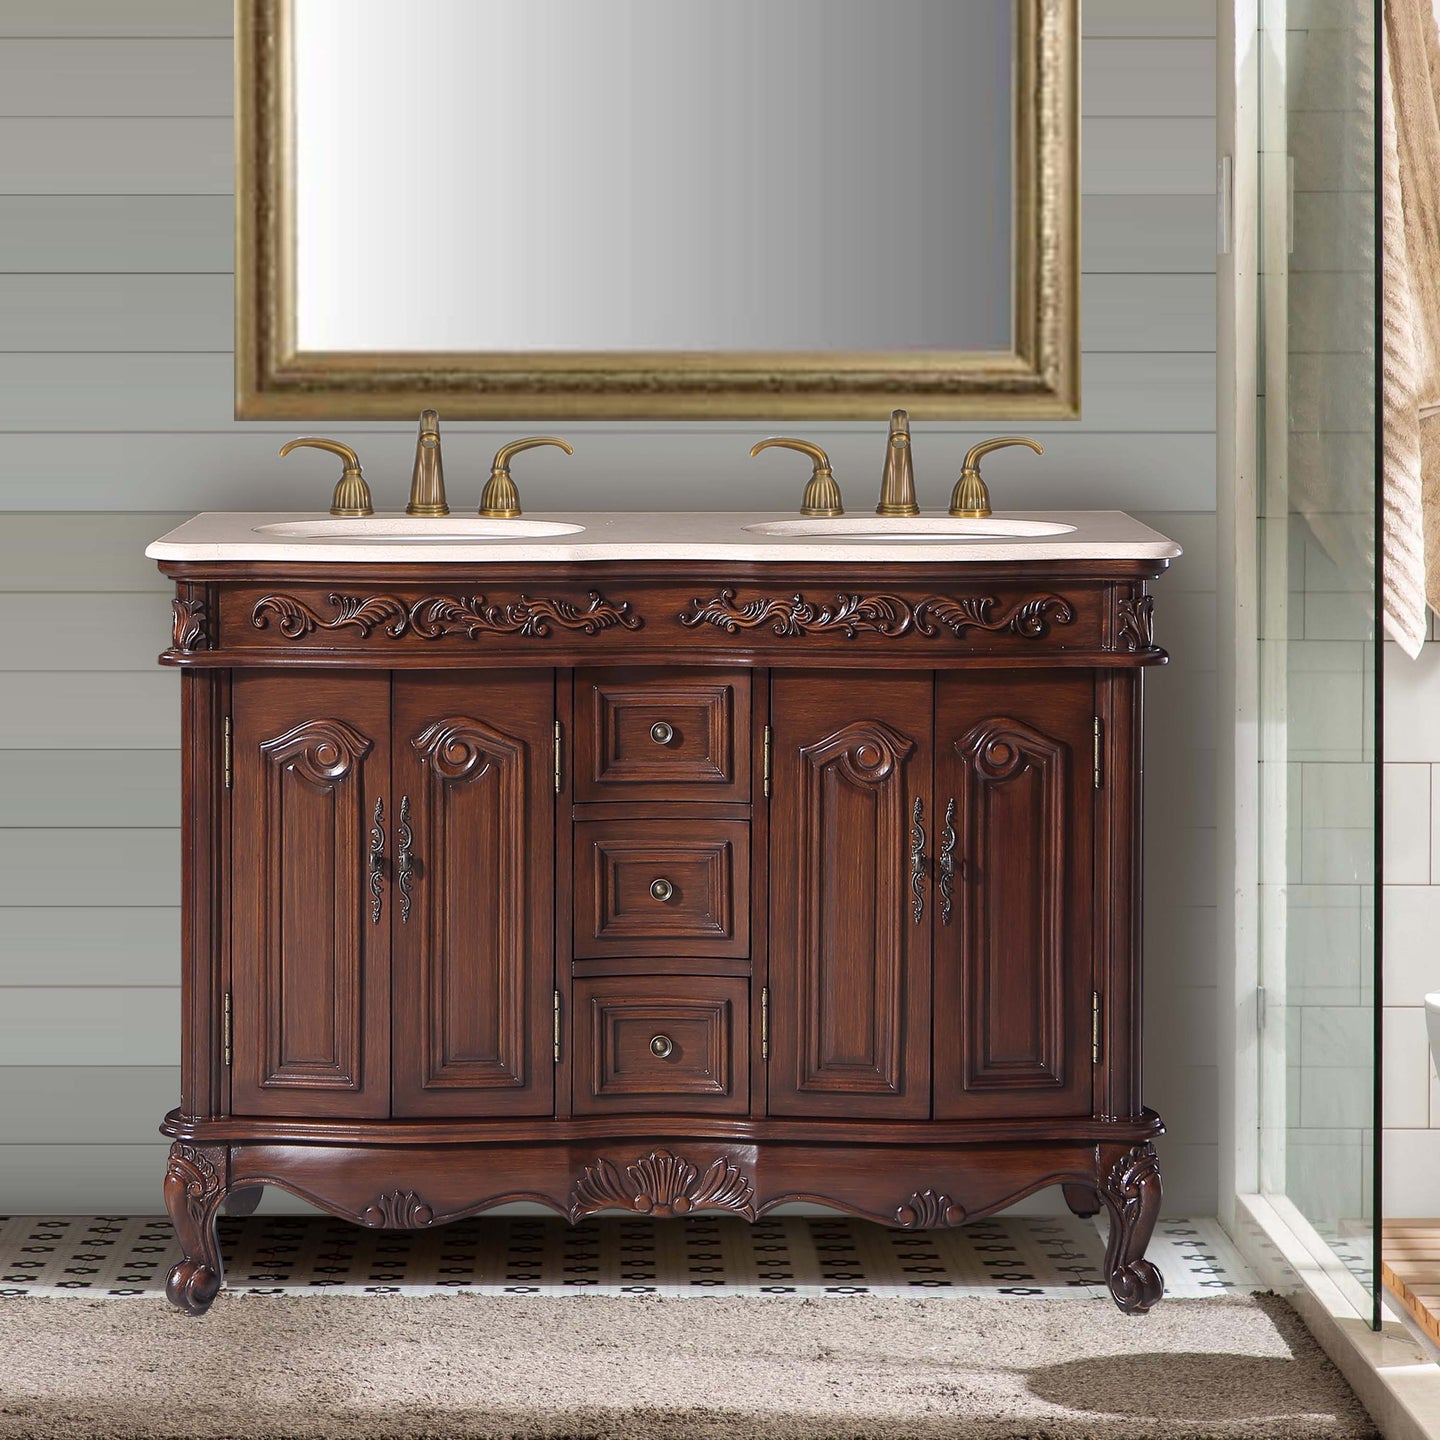 Silkroad Exclusive 48-inch English Chestnut Double Sink Vanity with Crema Marfil Marble Top - V0145CW48D